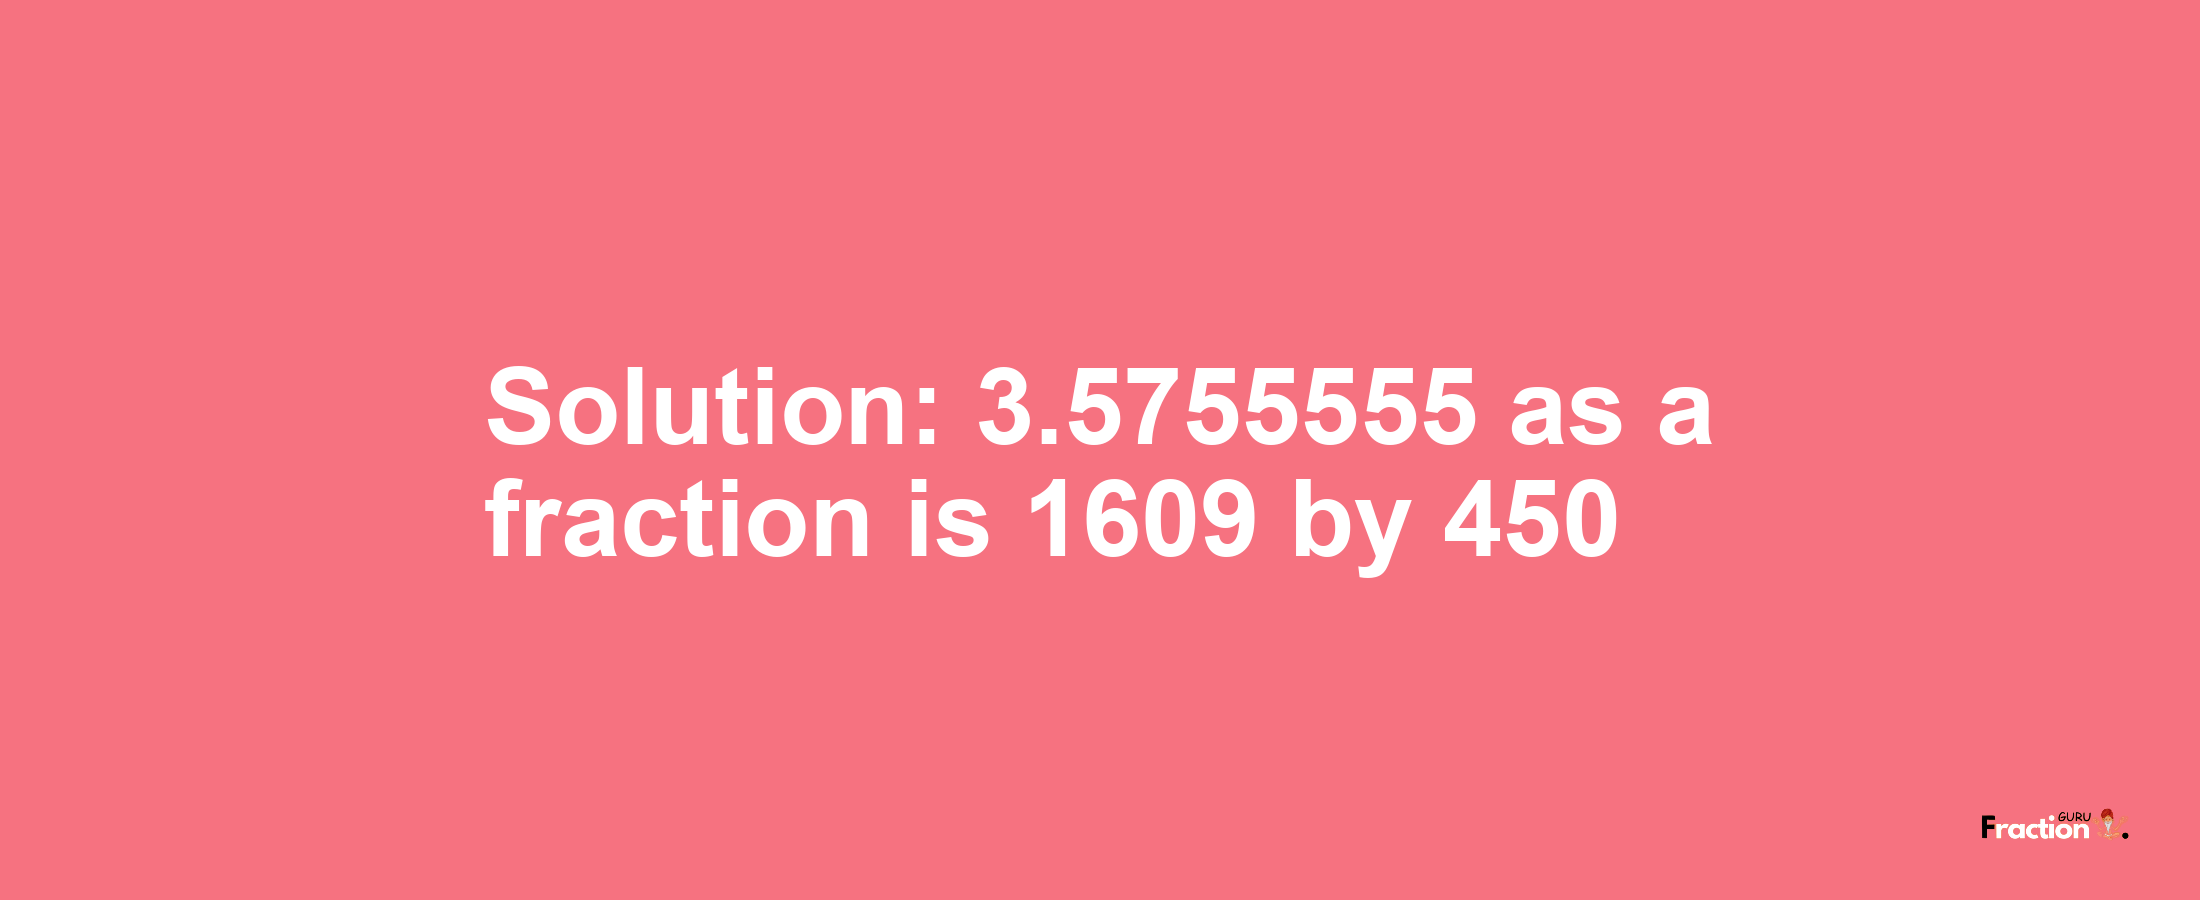 Solution:3.5755555 as a fraction is 1609/450